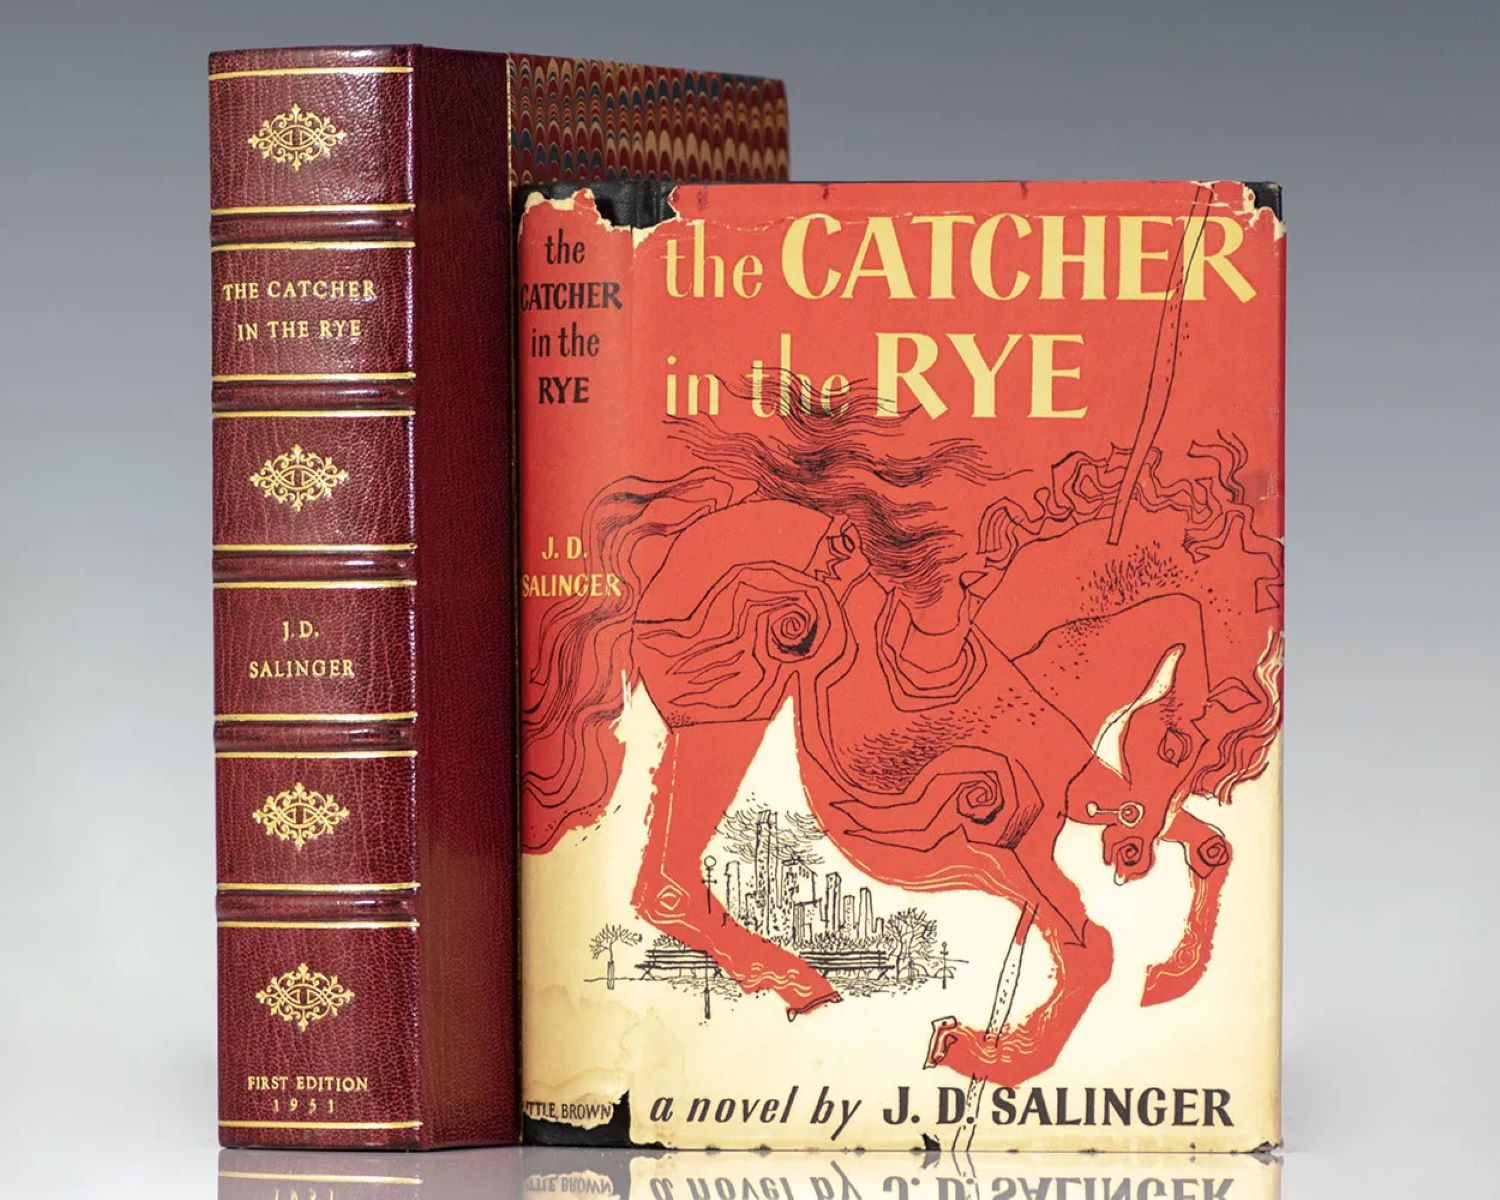 18-astounding-facts-about-the-catcher-in-the-rye-j-d-salinger